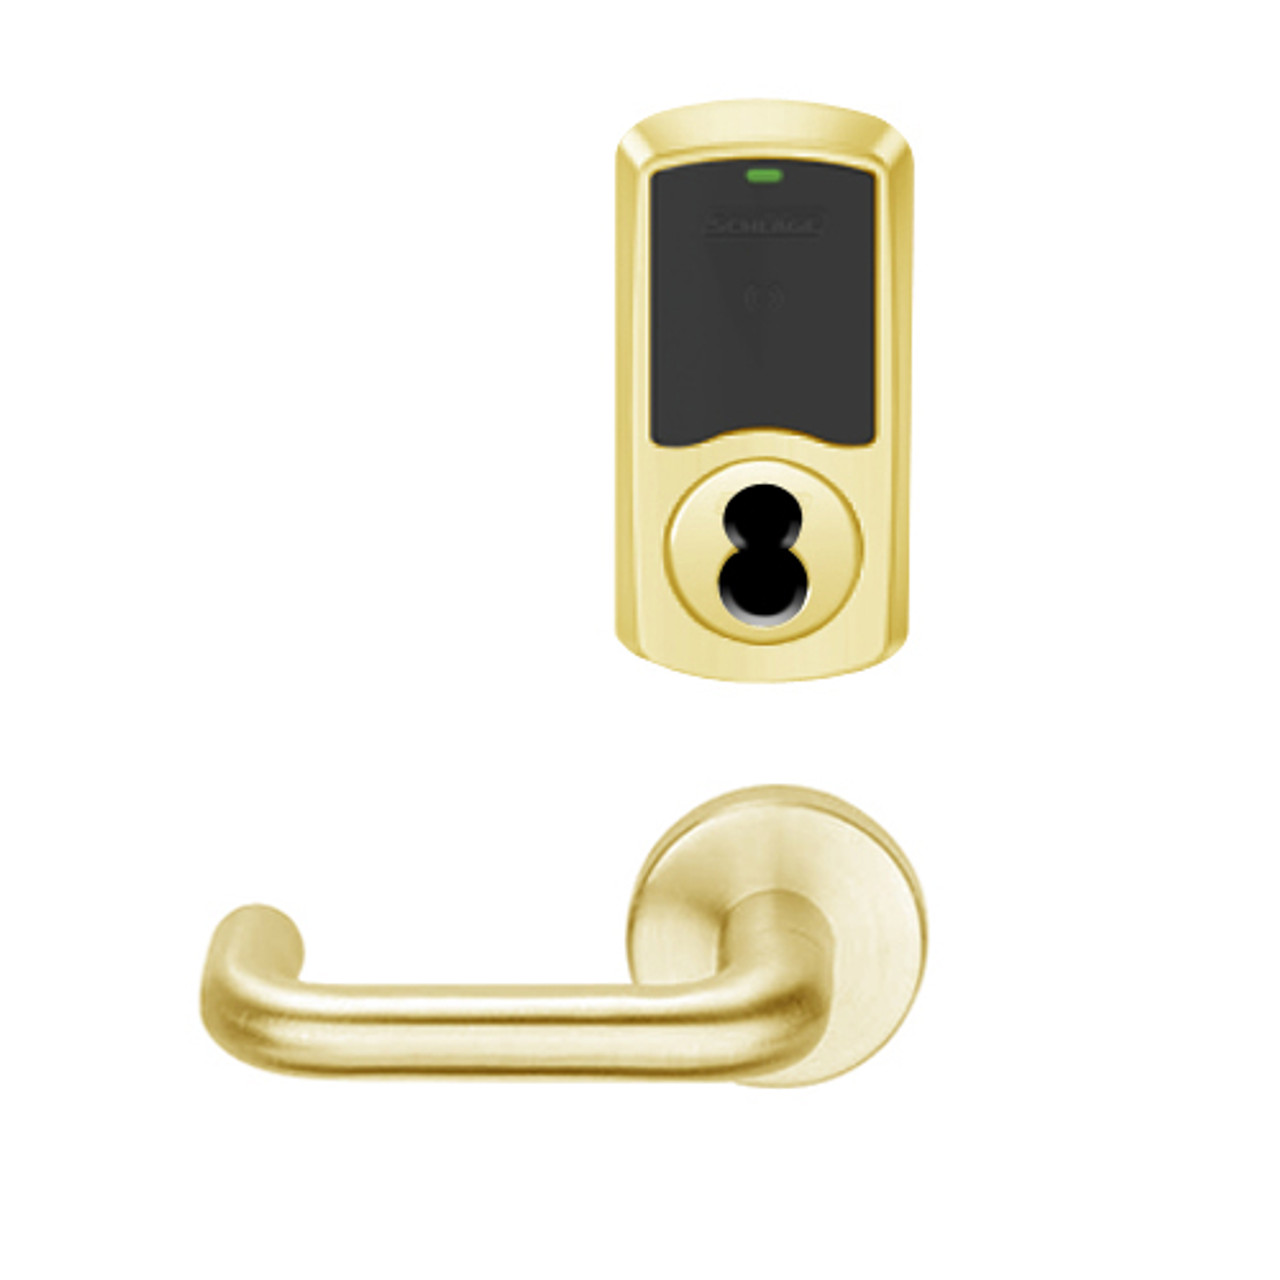 LEMS-GRW-J-03-605-00A Schlage Storeroom Wireless Greenwich Mortise Lock with LED Indicator and Tubular Lever Prepped for FSIC in Bright Brass